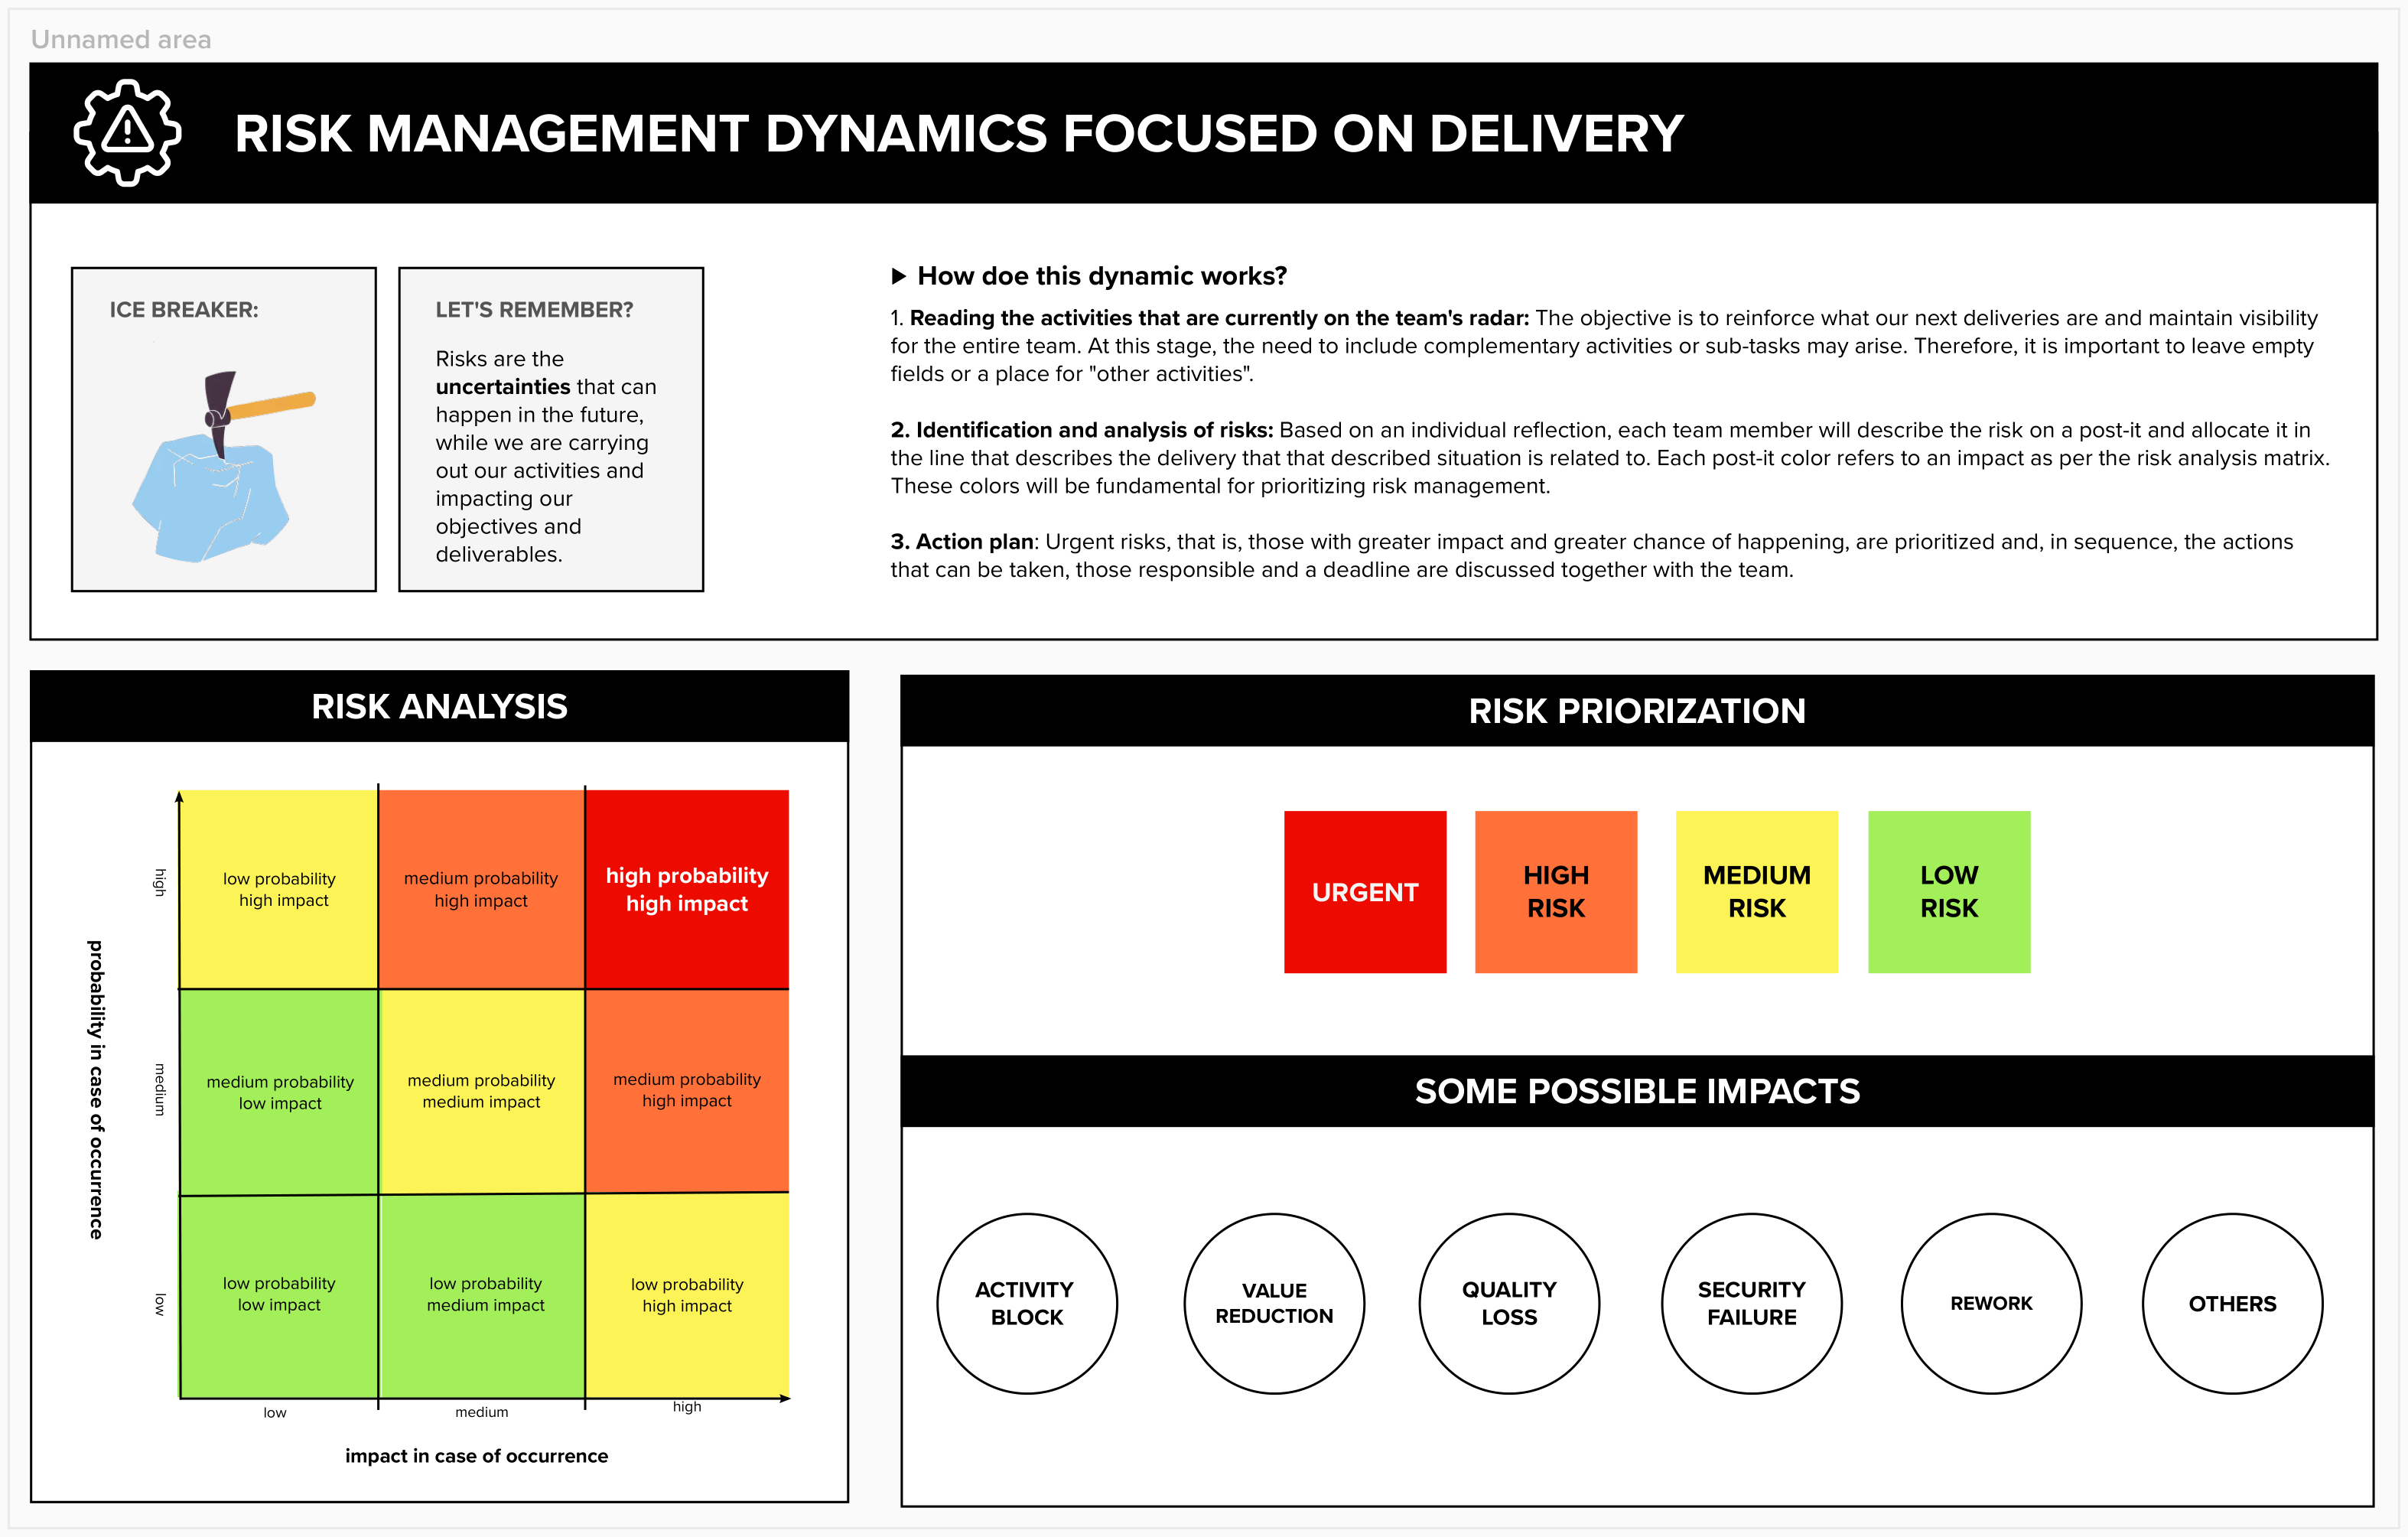 Infographic showing risk management dynamics